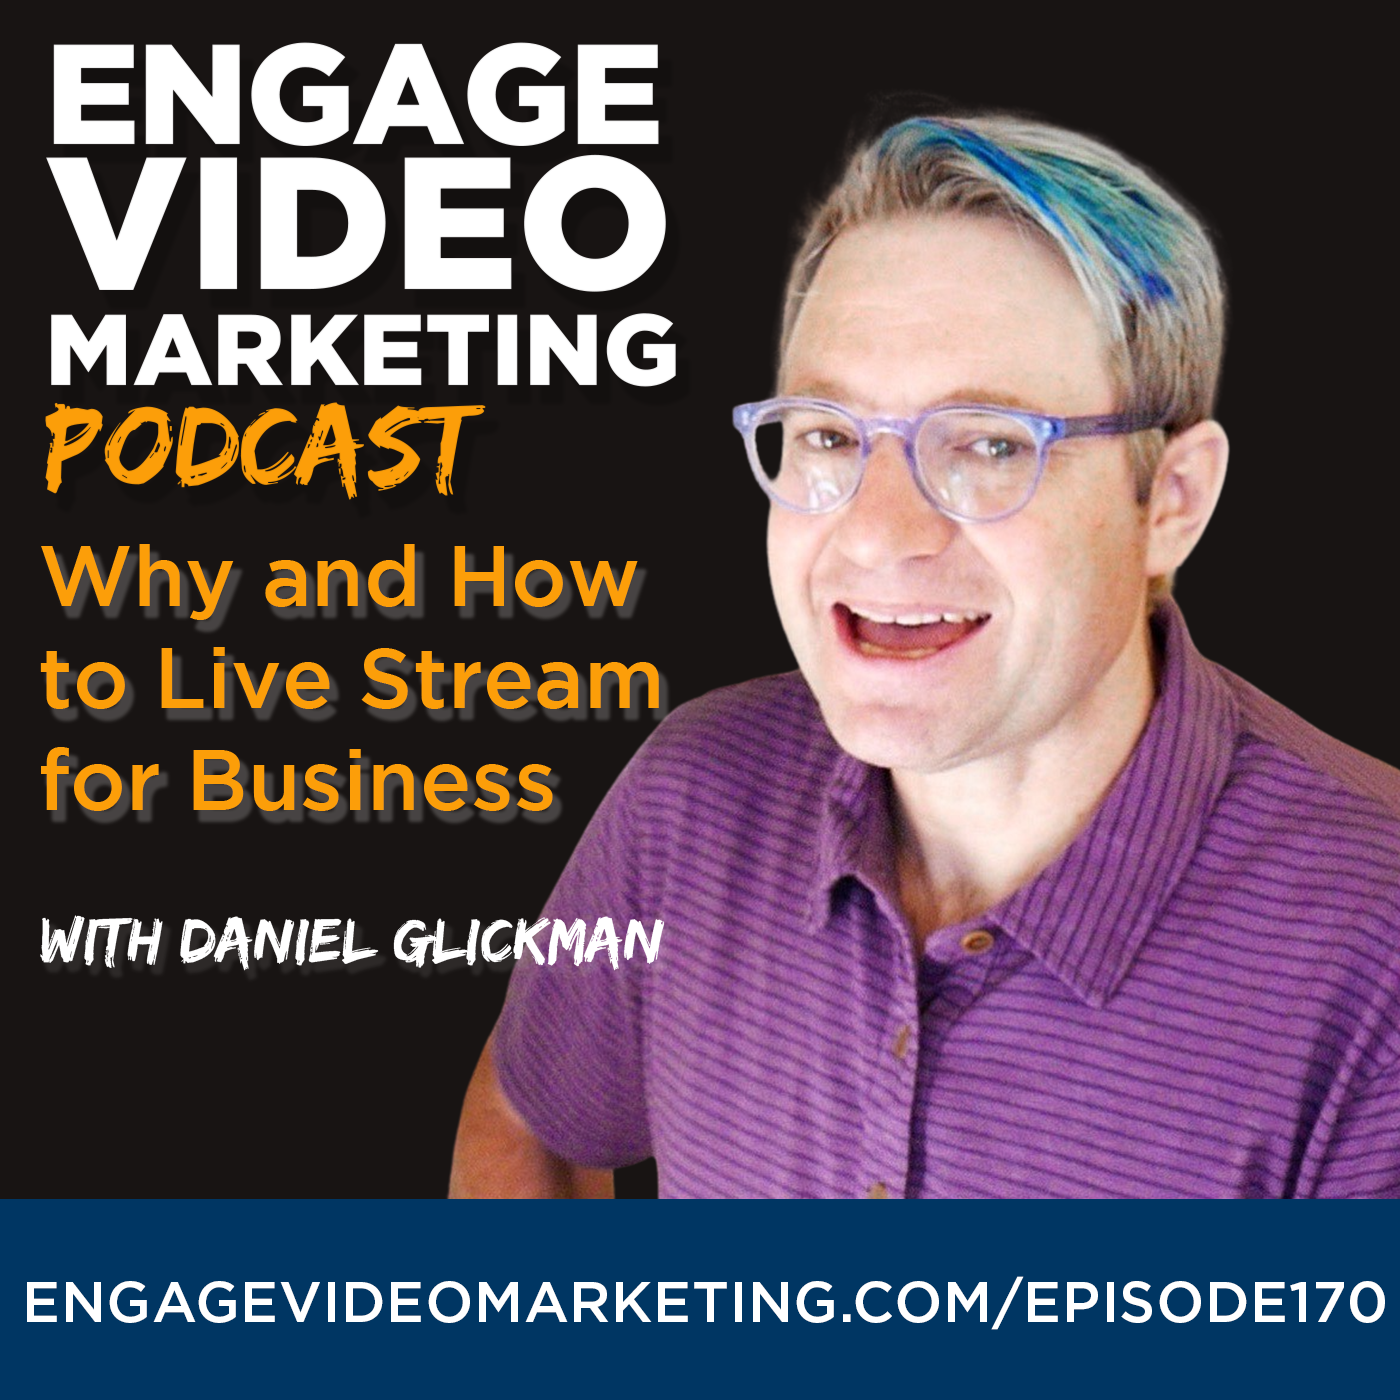 Why & How to Live Stream for Business with Daniel Glickman